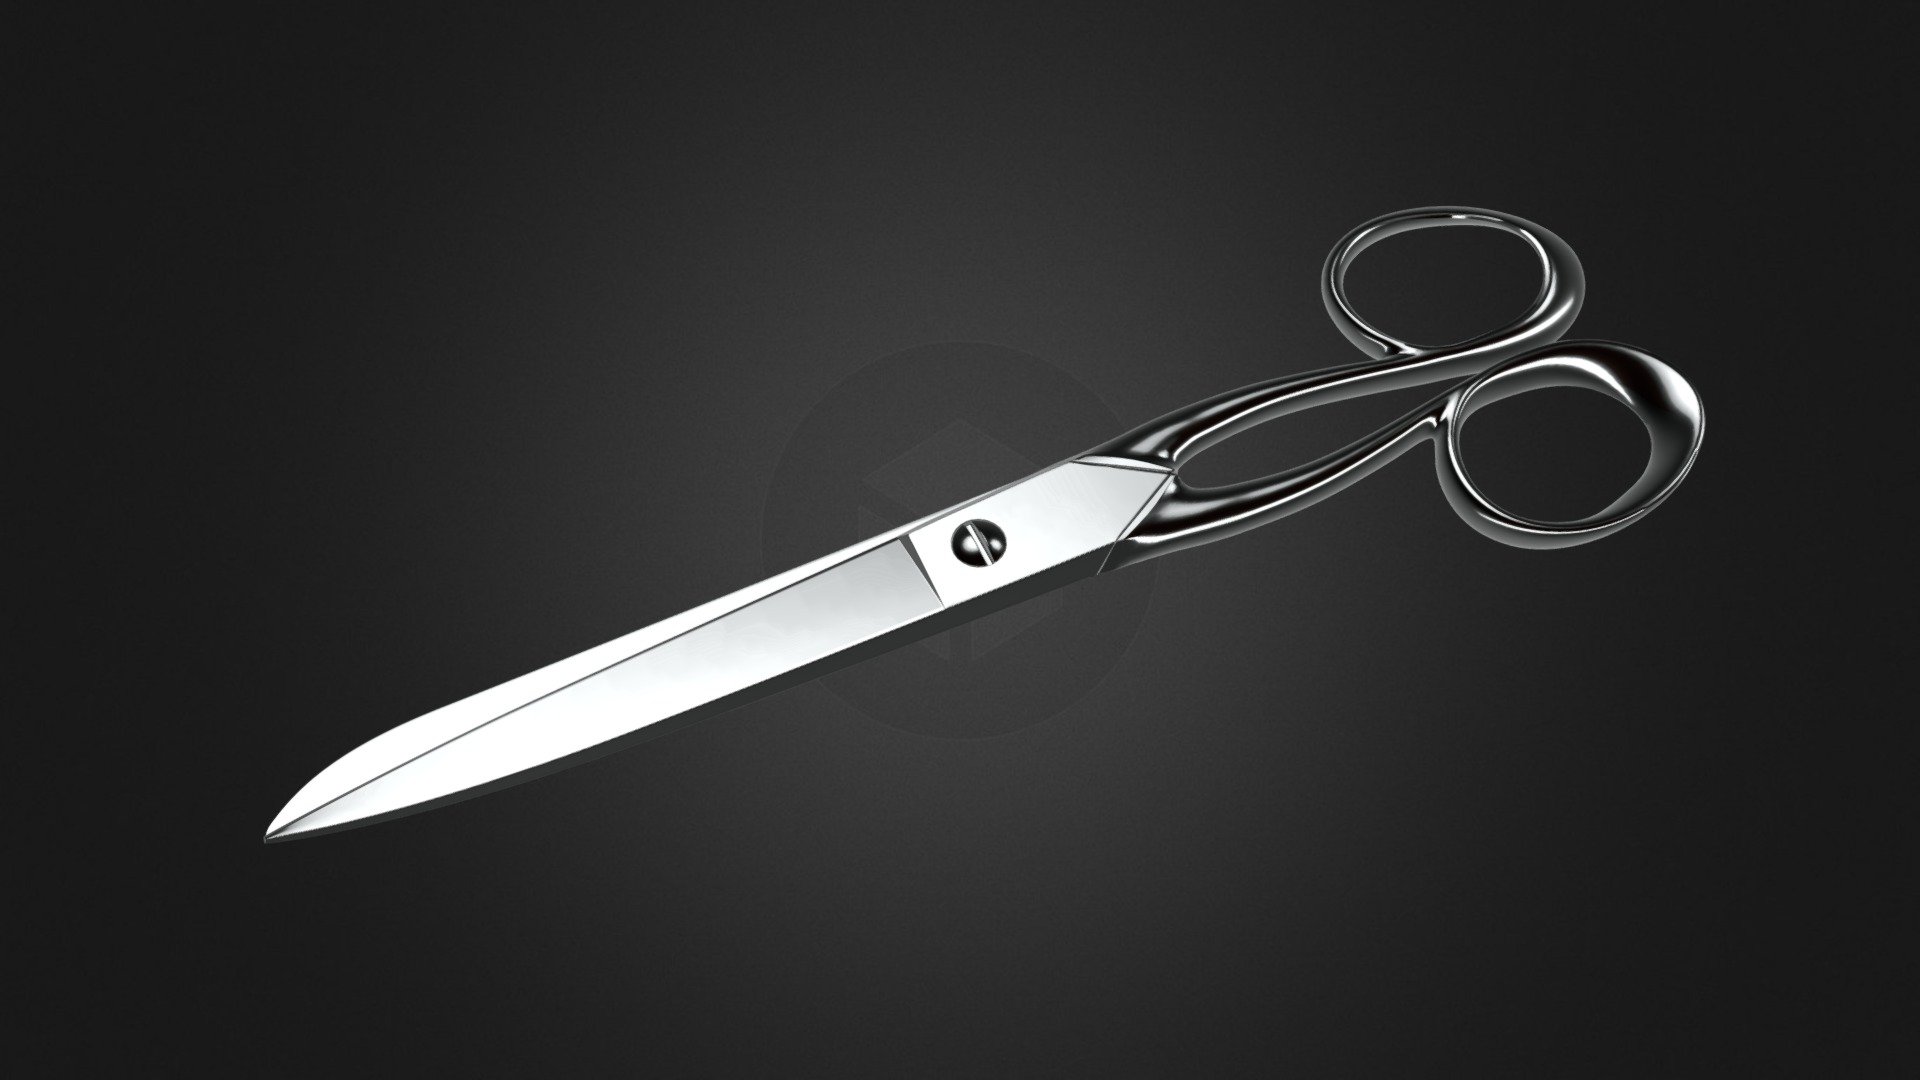 this scissors belonged to my mother's sewing kit - scissors - Buy Royalty Free 3D model by Manfred Kostka (@manfredkostka) 3d model